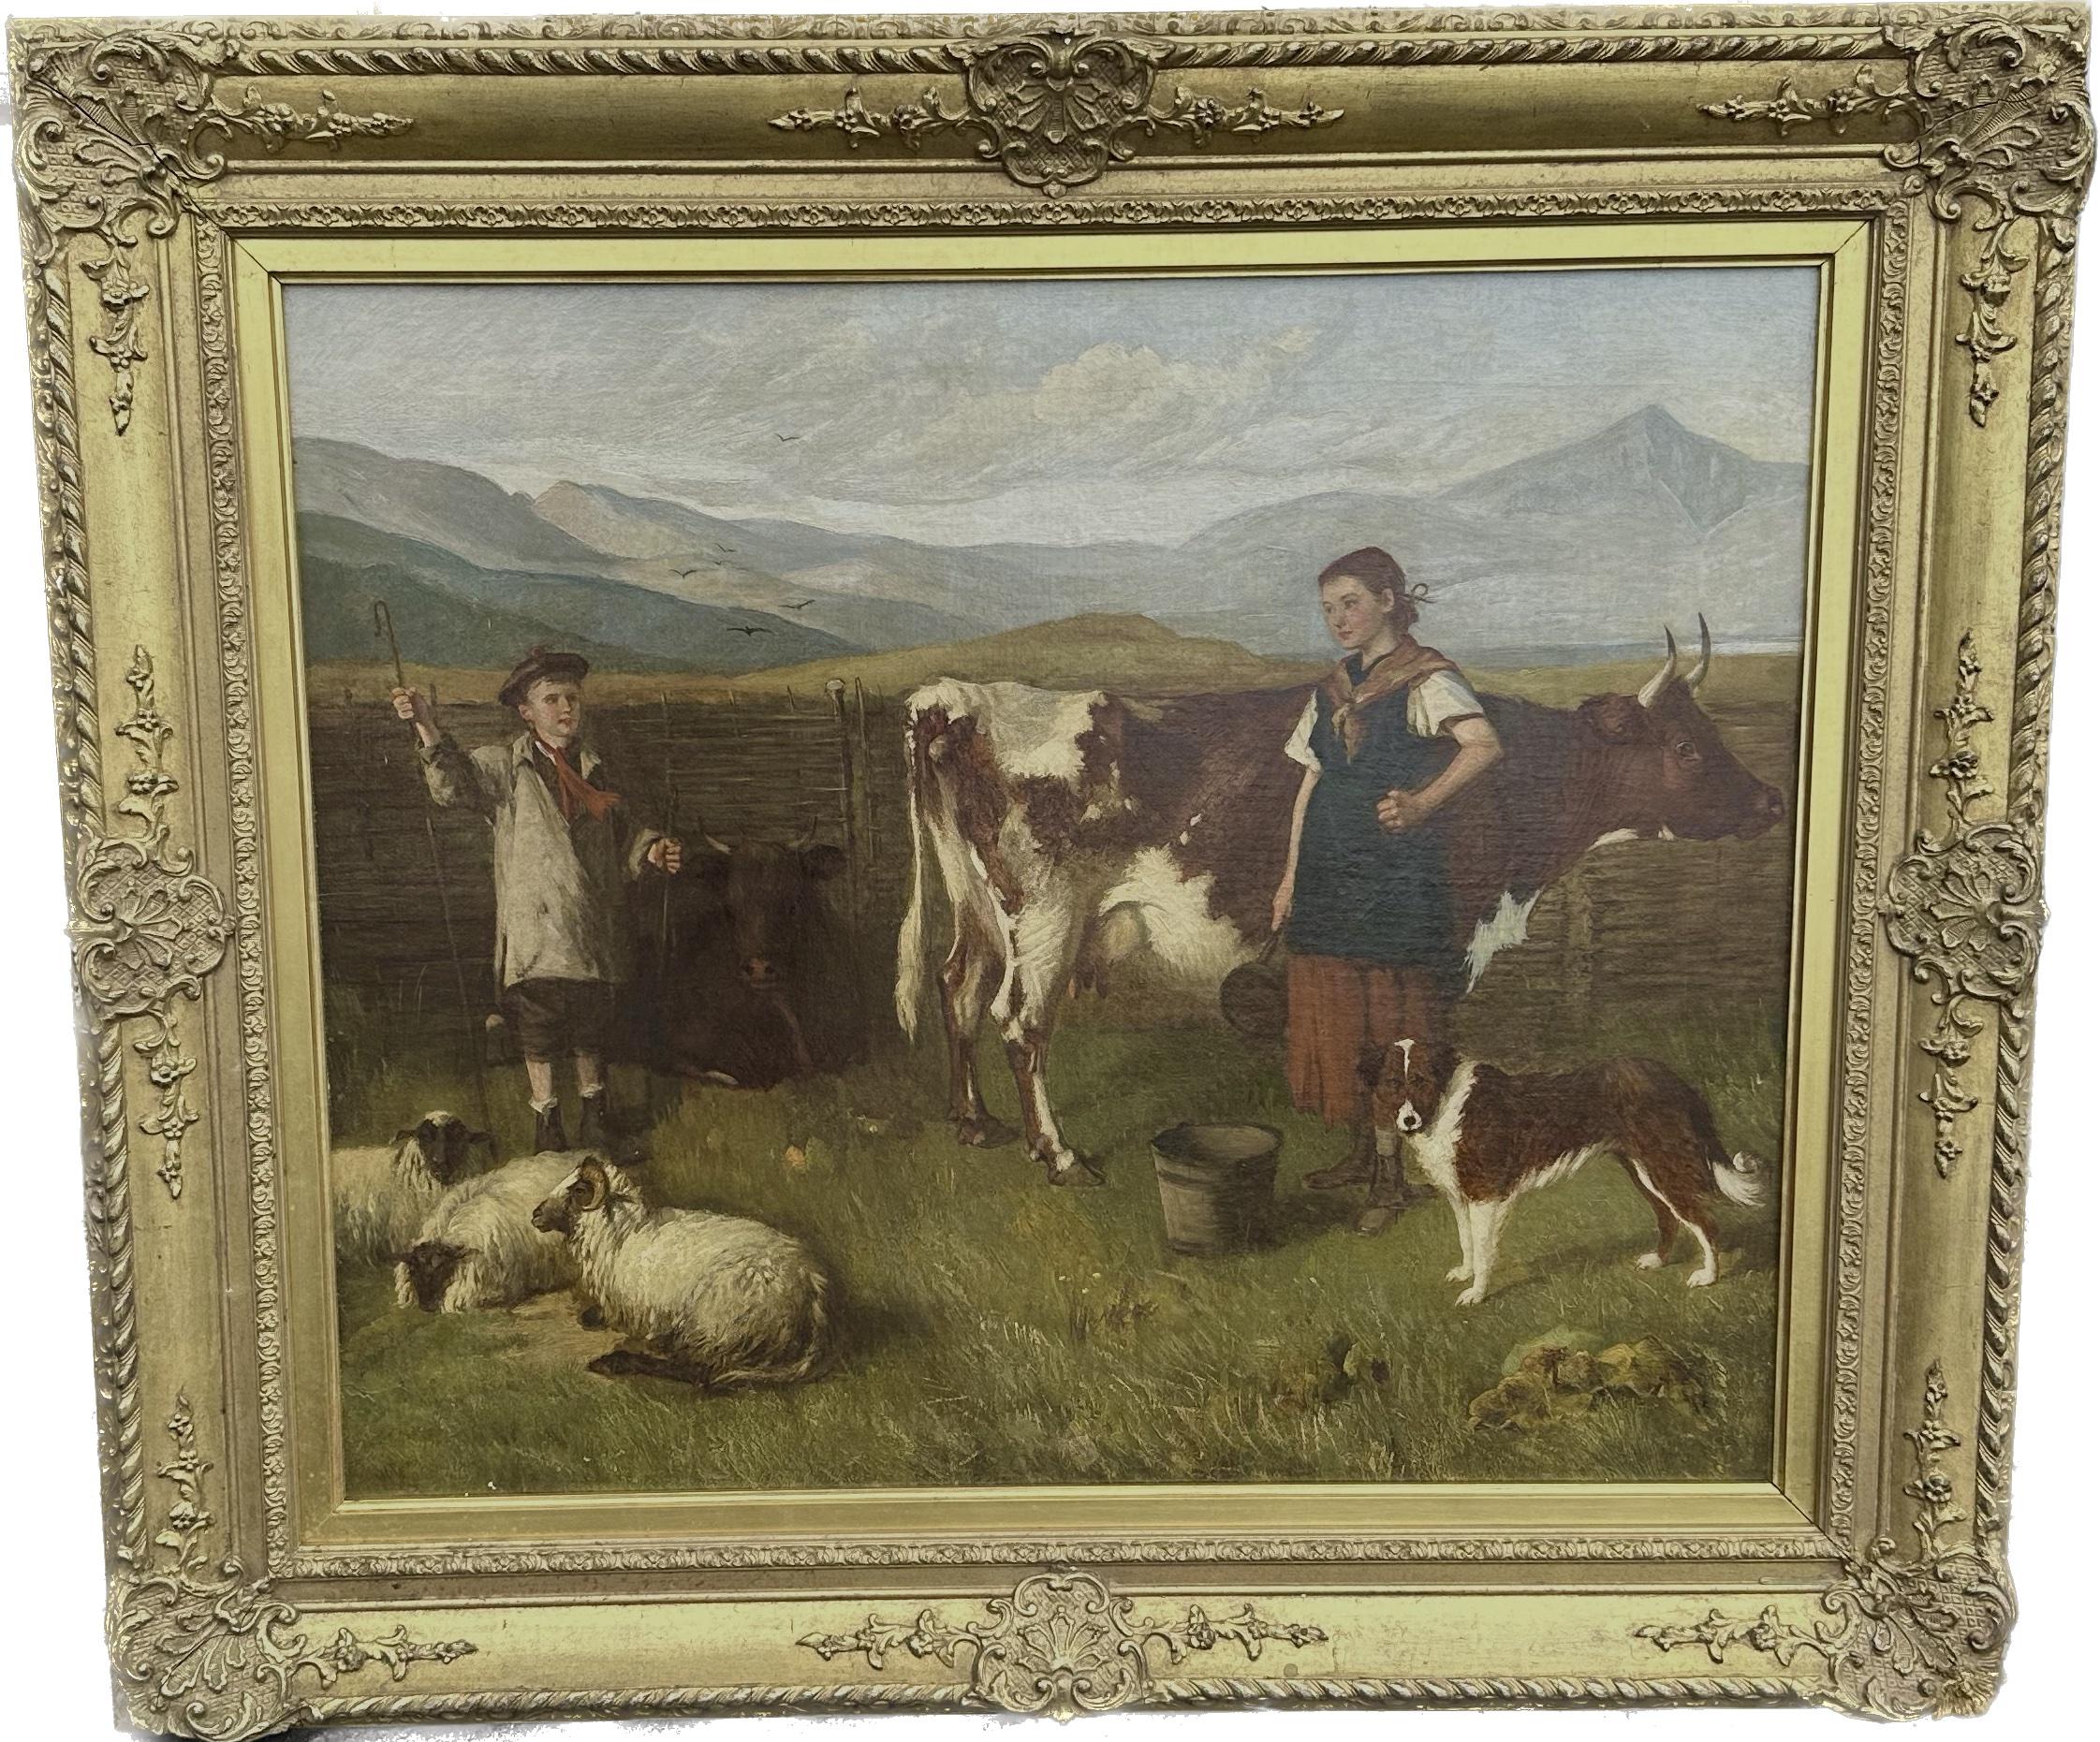 19th century Scottish farmers with cows , sheep, dogs in the Highlands - Painting by Henry William Banks Davis